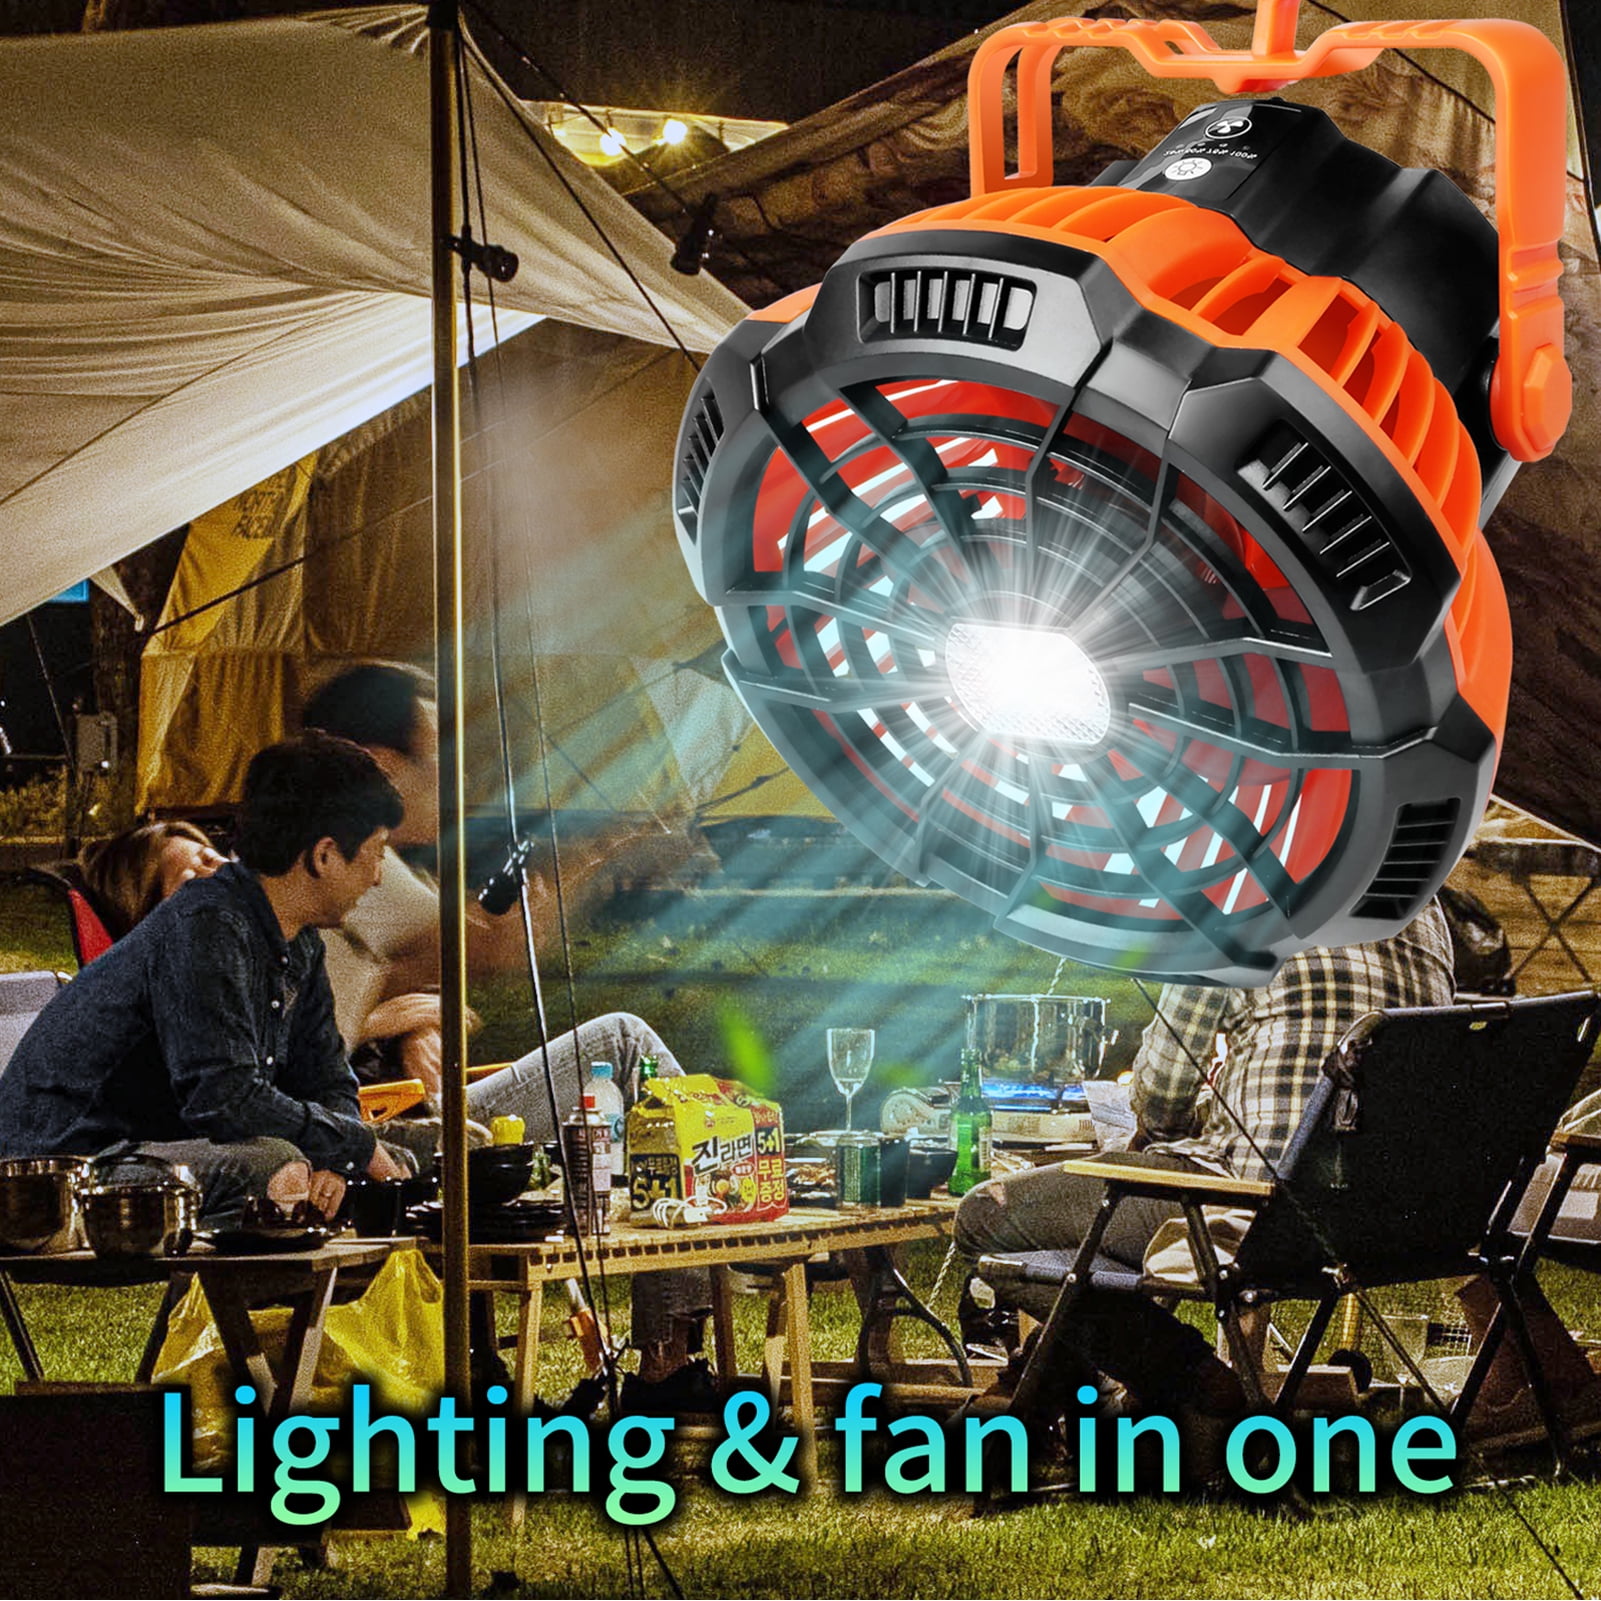 Portable Camping Fan with LED Lantern XTAUTO USB Rechargeable